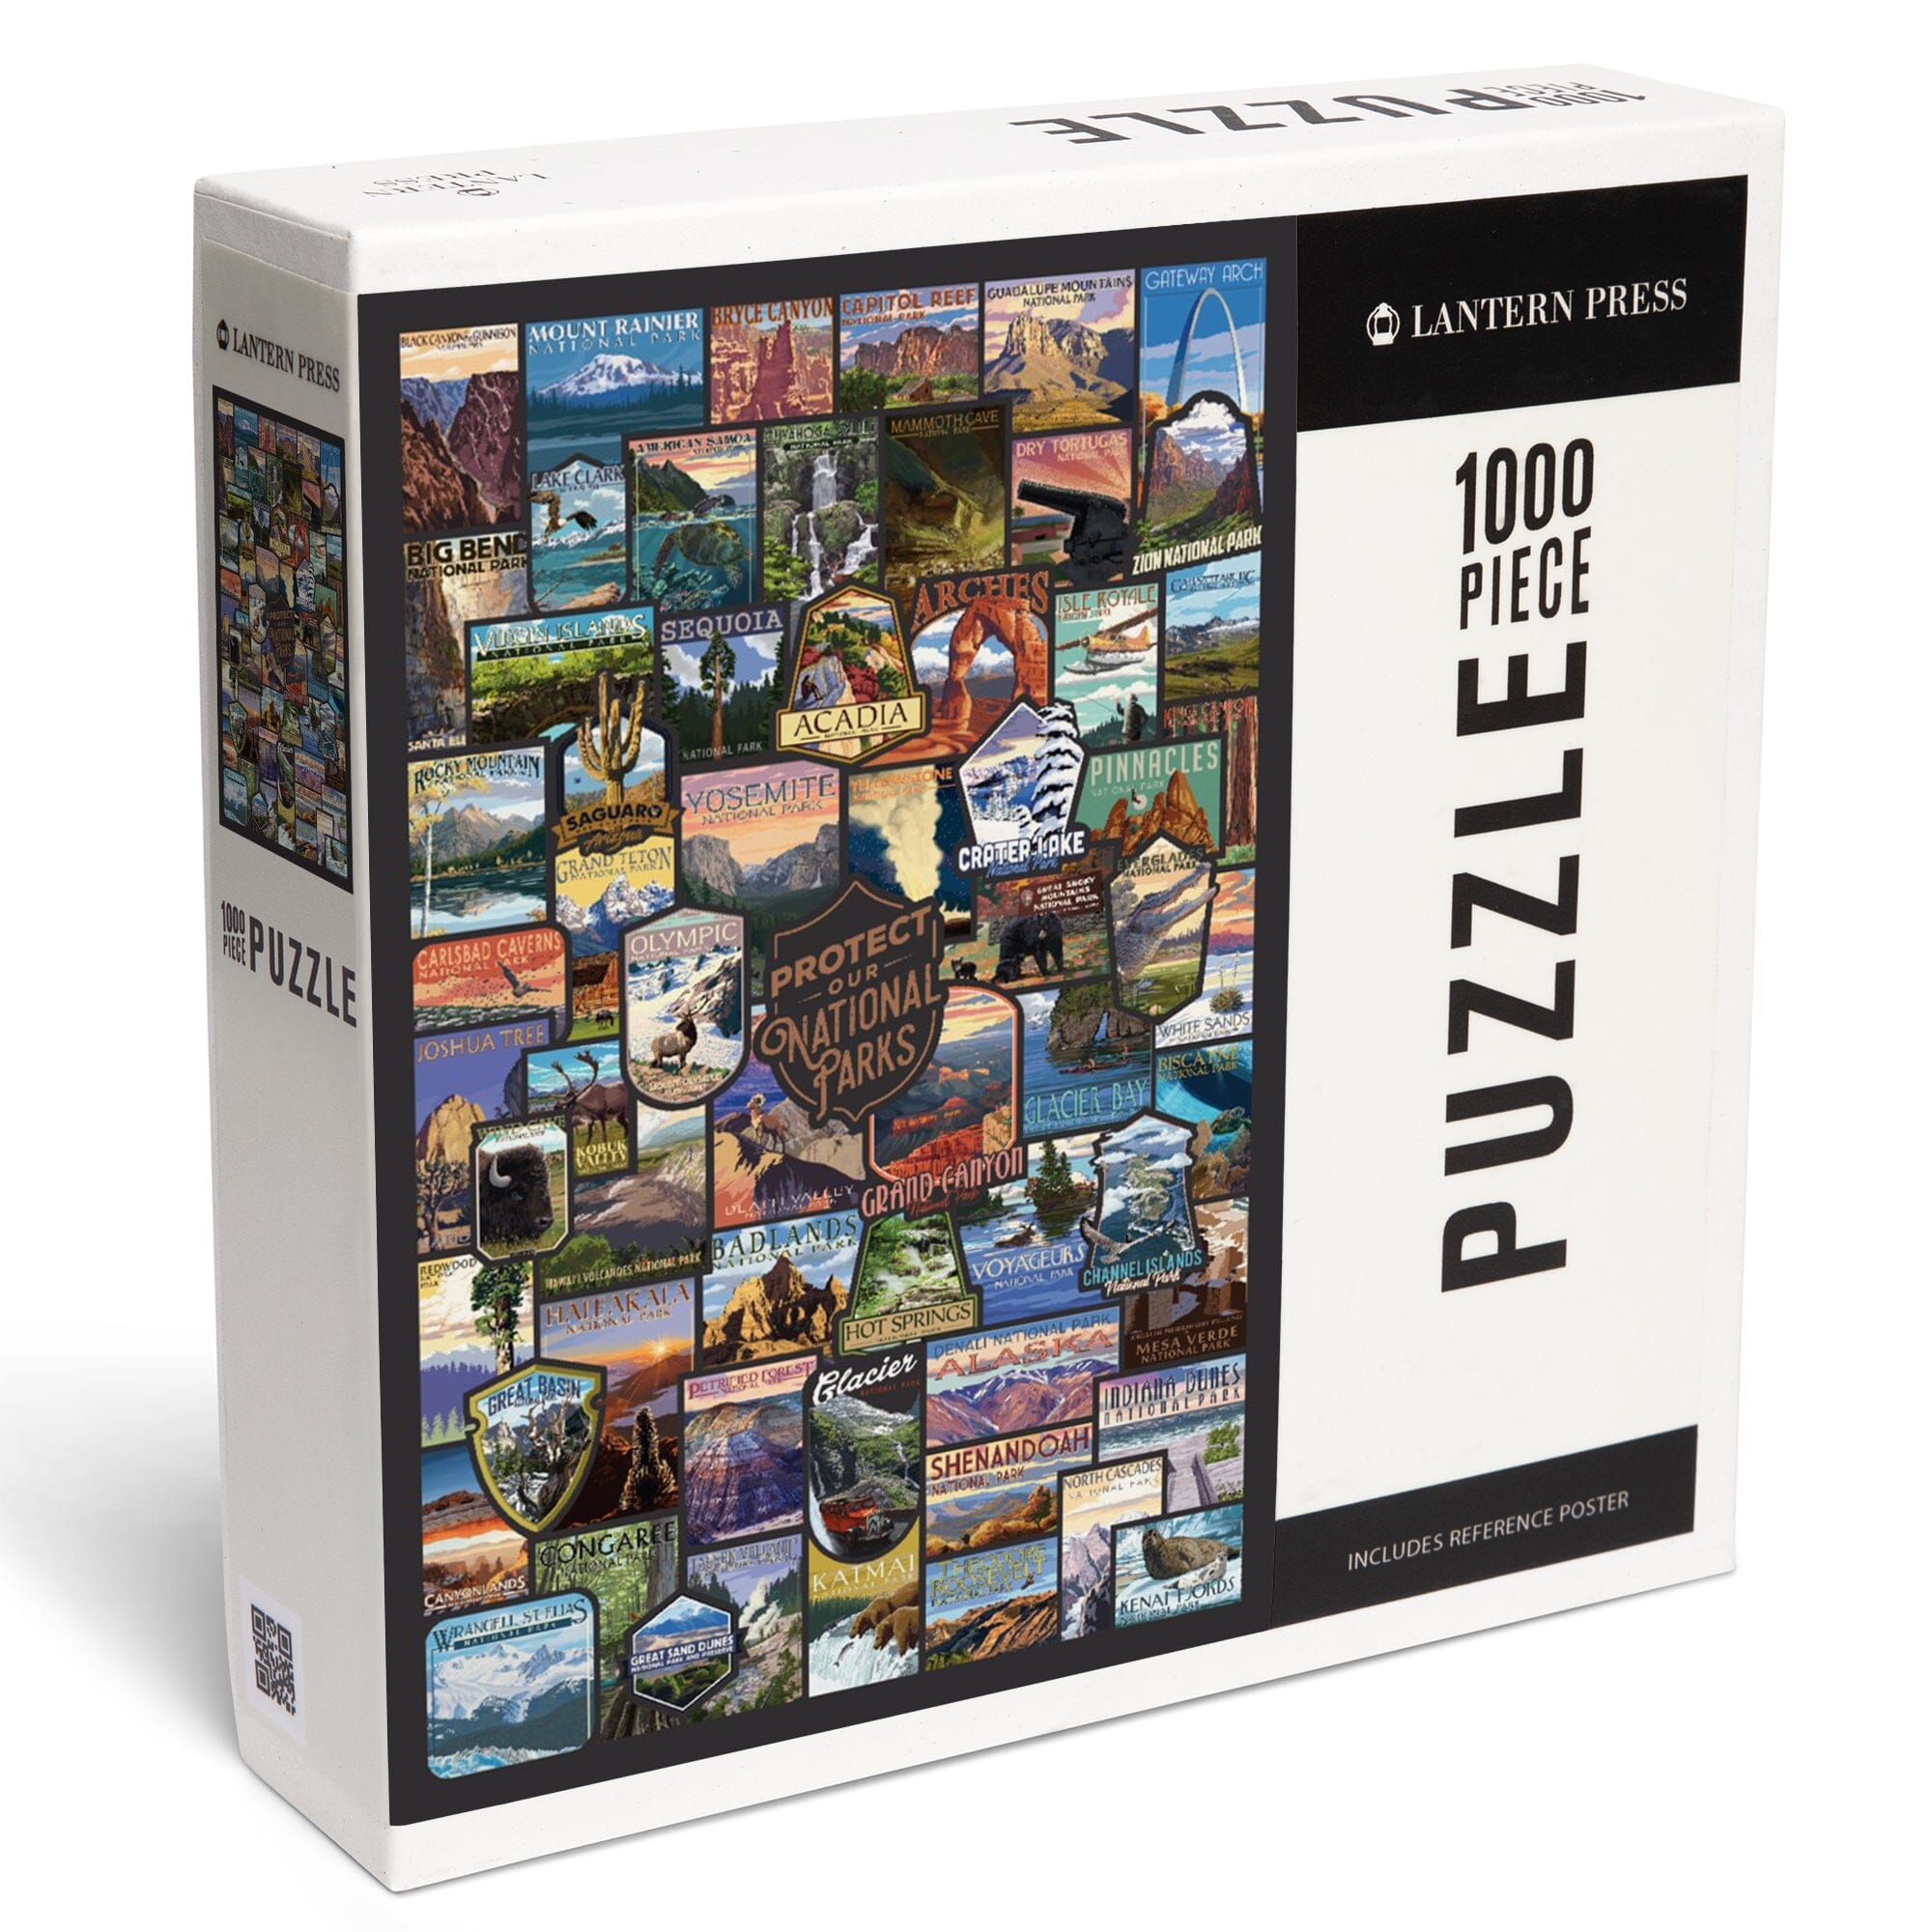 Puzzle Globetrotter Collection: France, 1 000 pieces